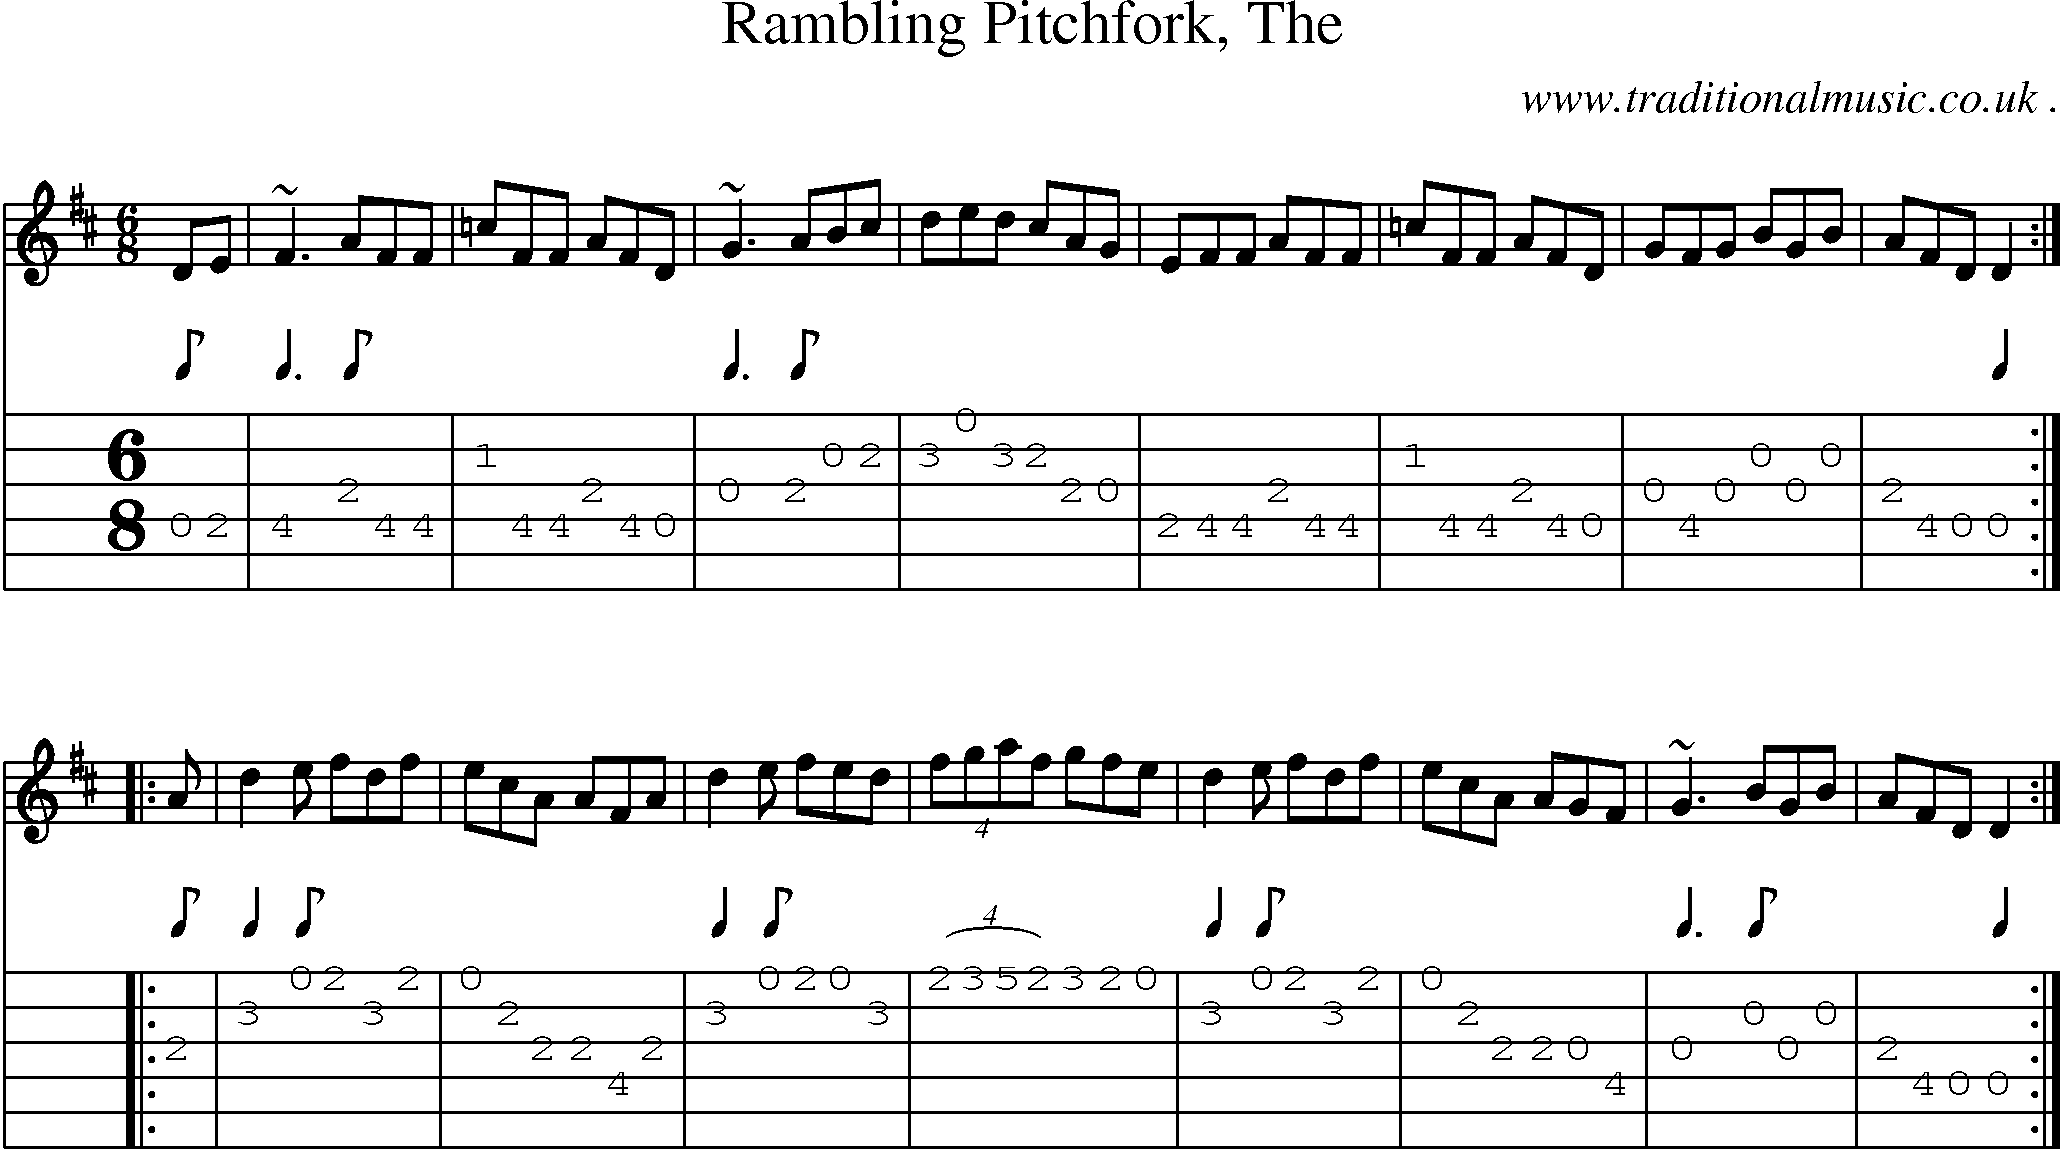 Sheet-music  score, Chords and Guitar Tabs for Rambling Pitchfork The